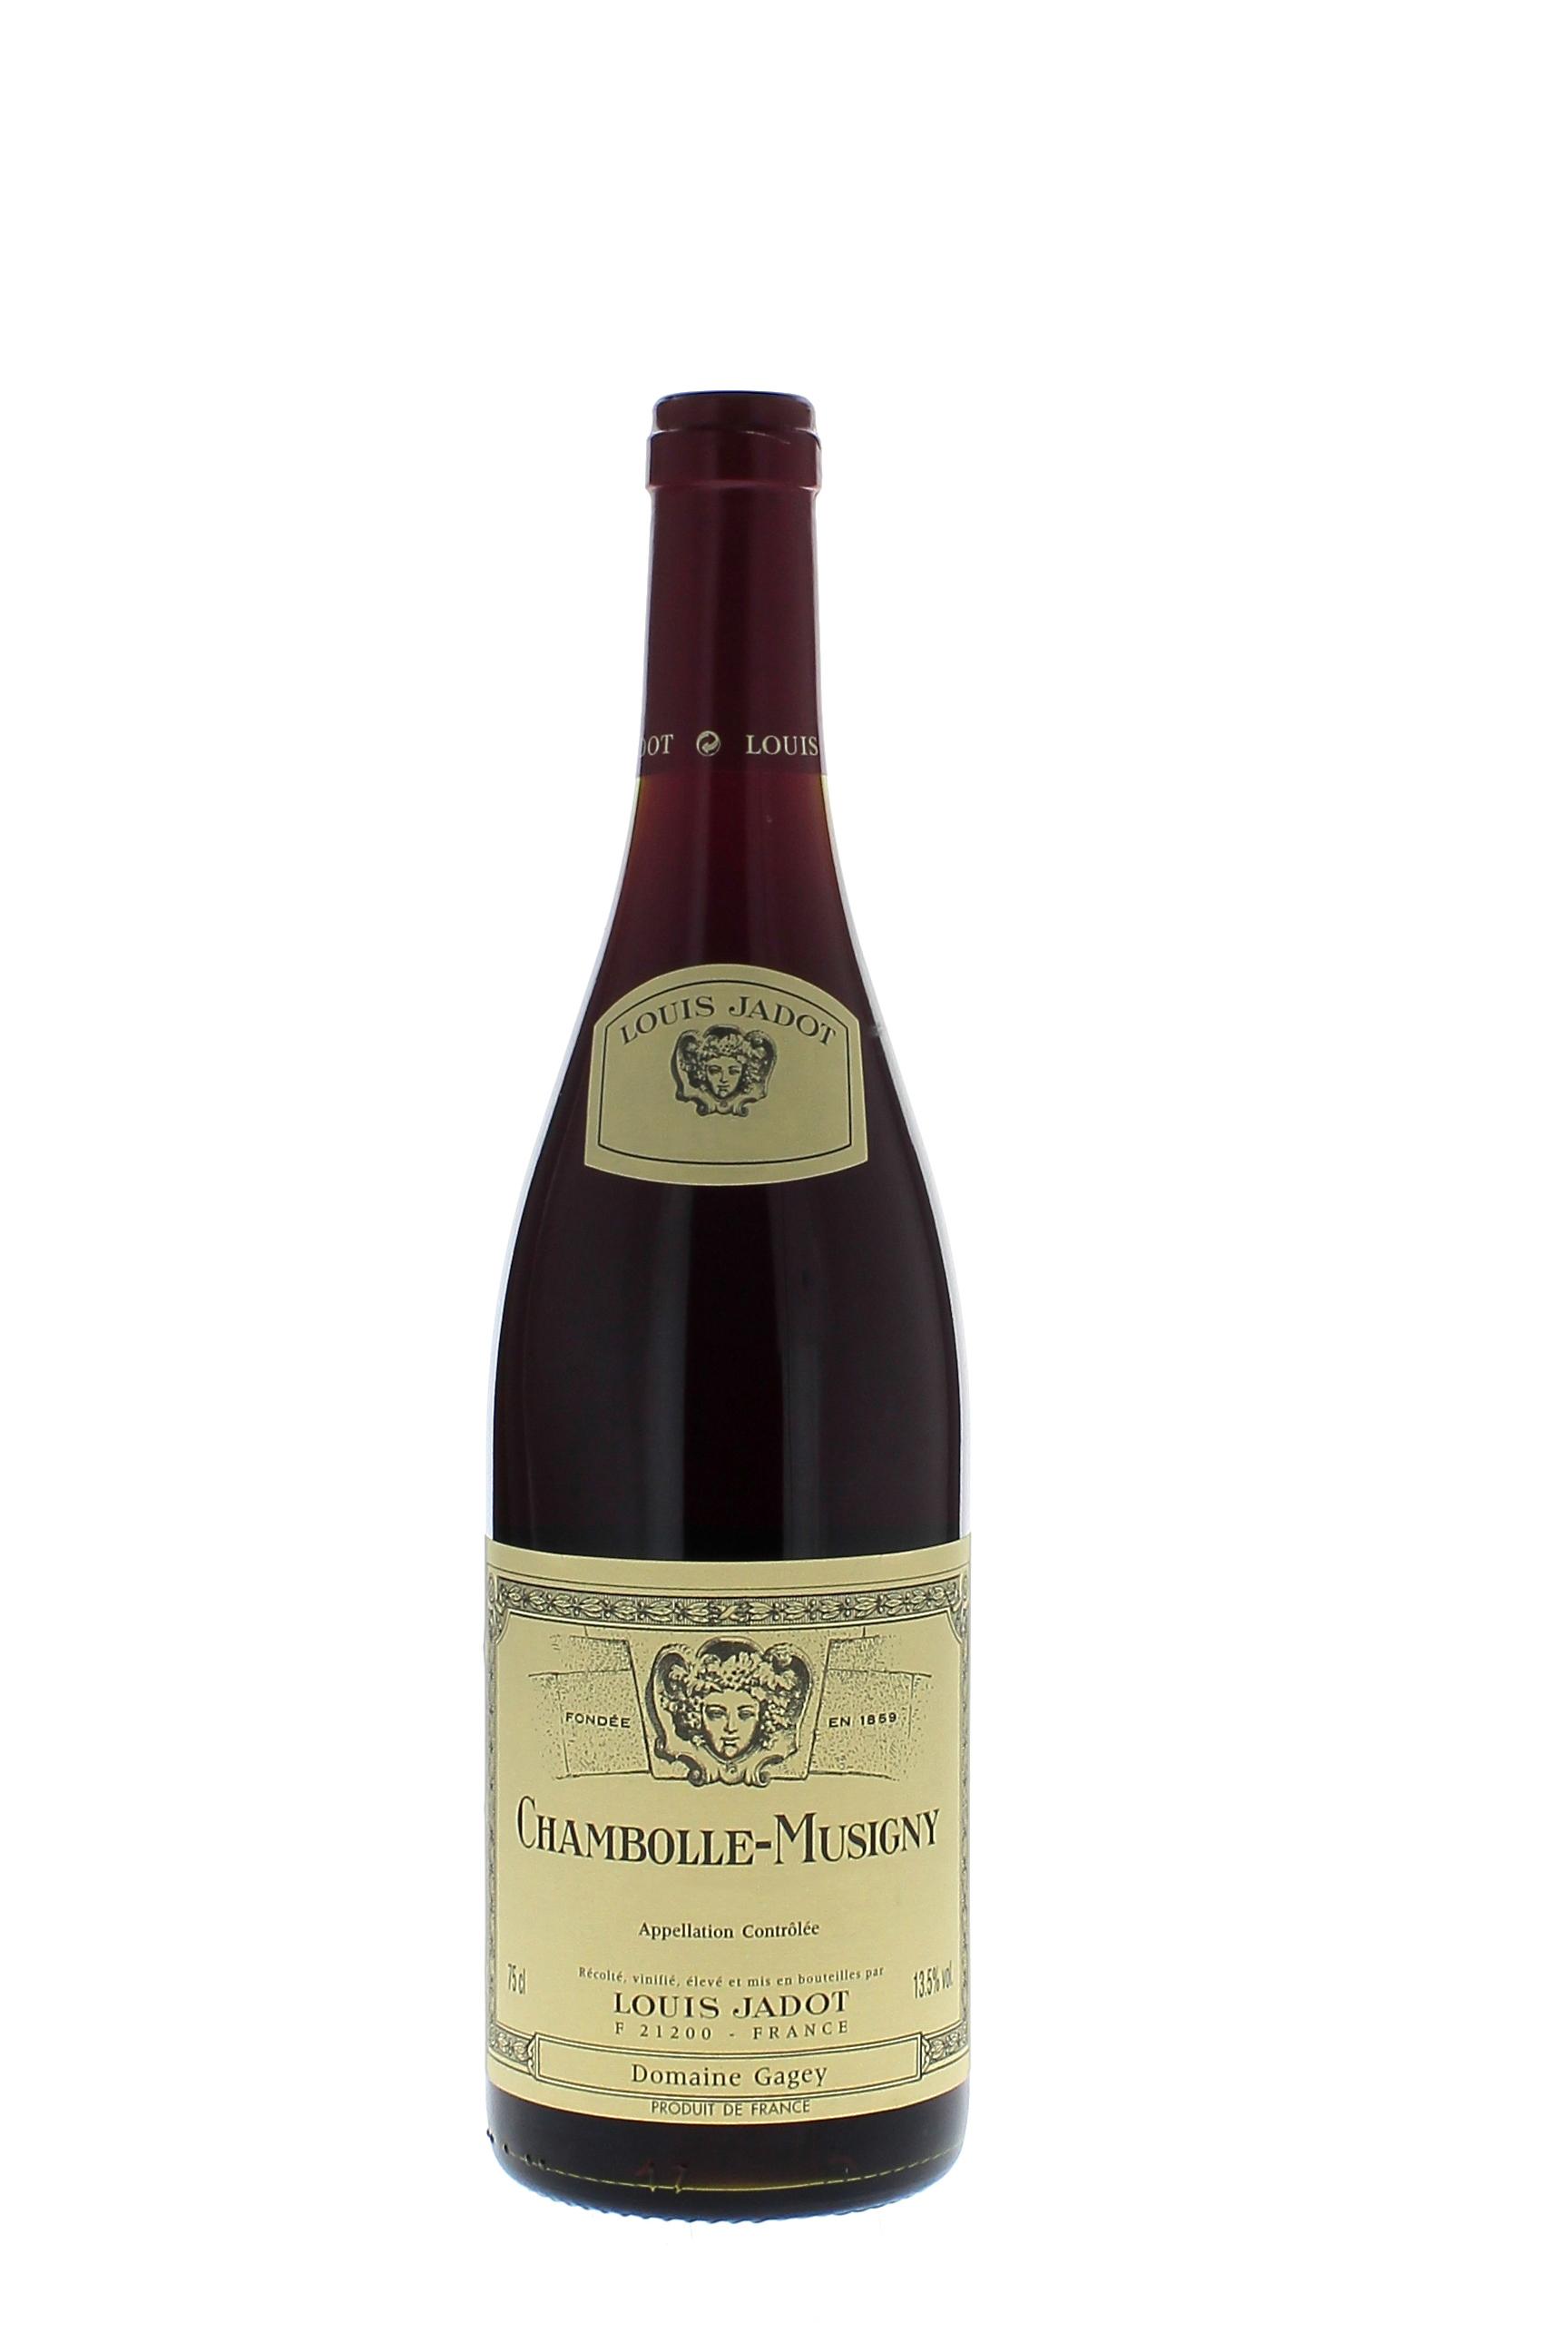 Chambolle musigny les fues 2003  JADOT Louis, Bourgogne rouge